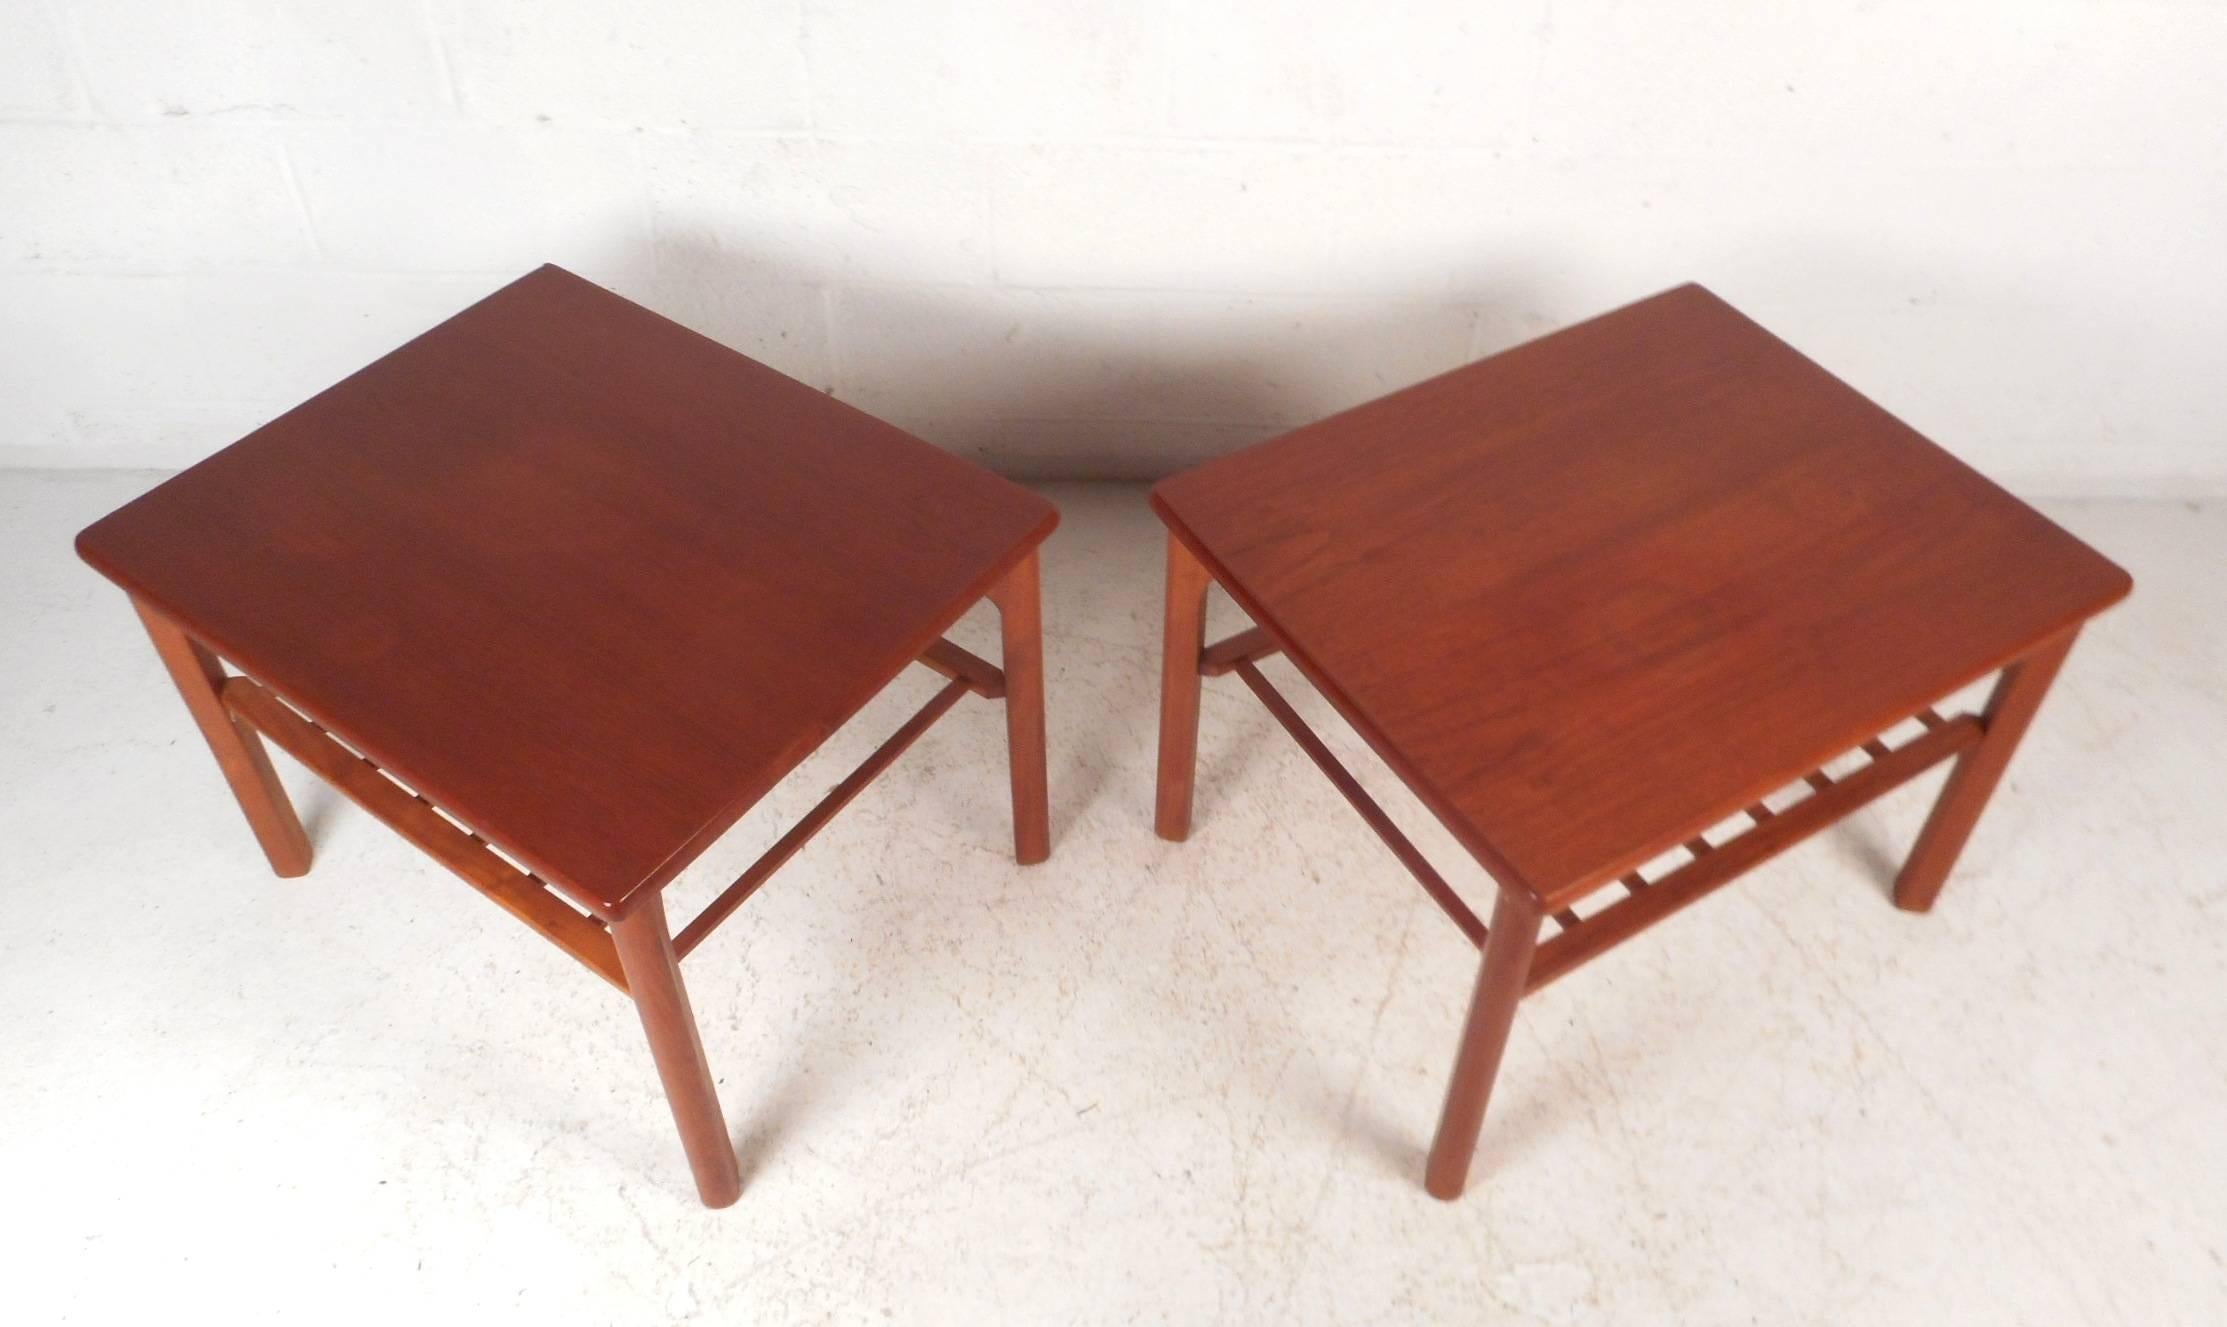 This fabulous pair of vintage modern end tables feature a lower slatted tier for added storage. Sleek design was made in Denmark by Mobelfabrik Toften and has elegant teak wood grain throughout. These lovely side tables have smooth rounded edges and